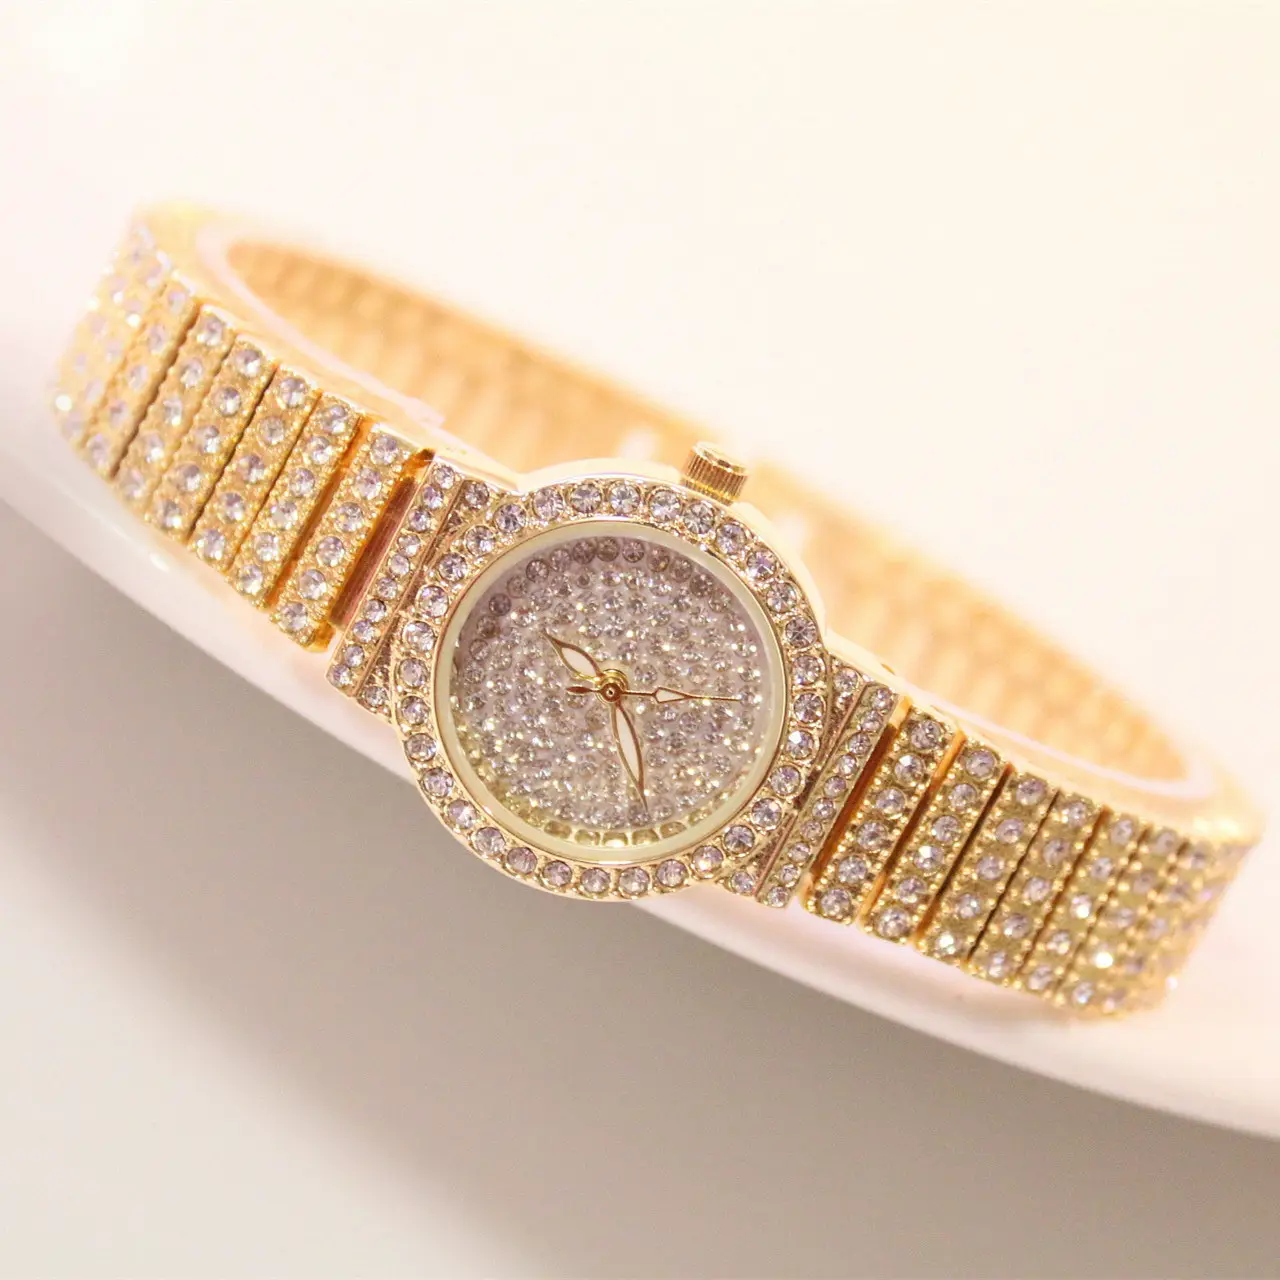 DAICY high end unique design round bling bling full diamond lady watch